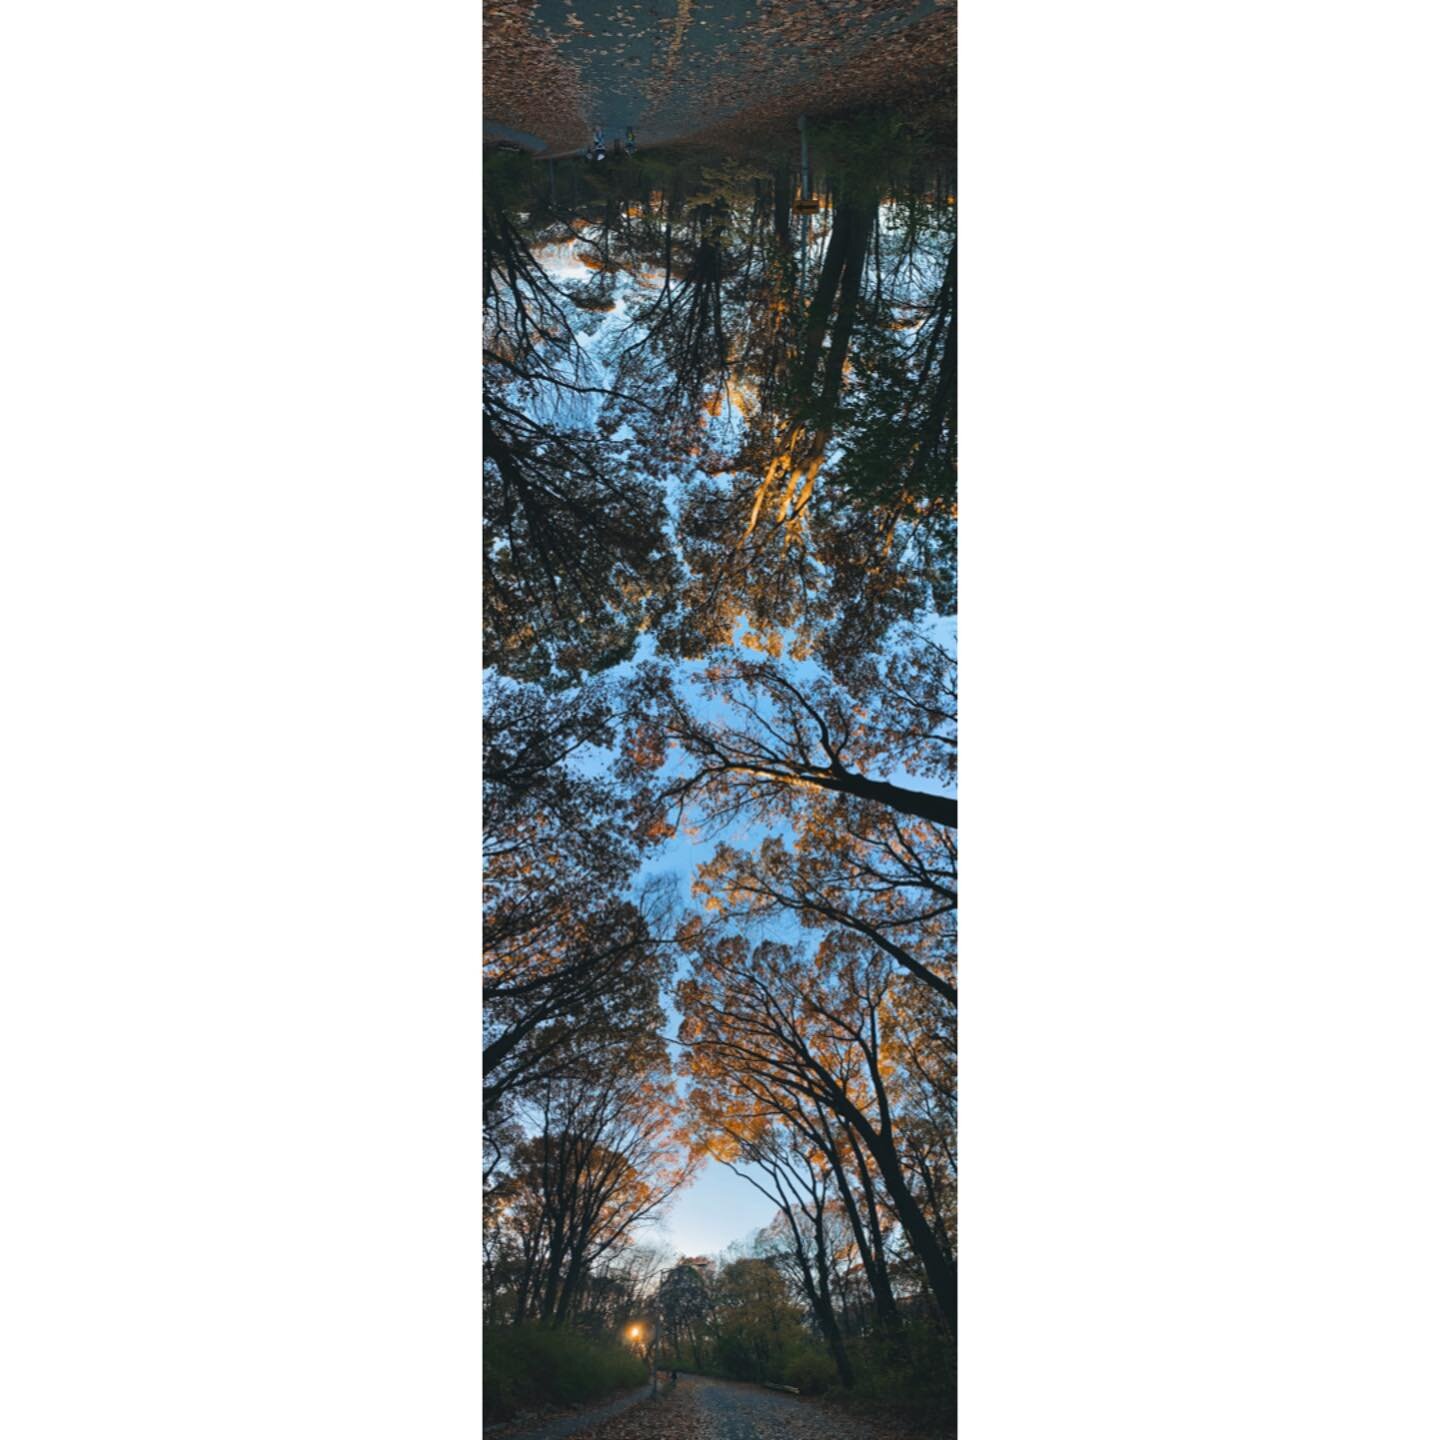 #AutumnalWalks in #Queens 🍂🍃🍂🍃 ; Literally bent over backwards for this shot ; #iphonepanorama for the win!